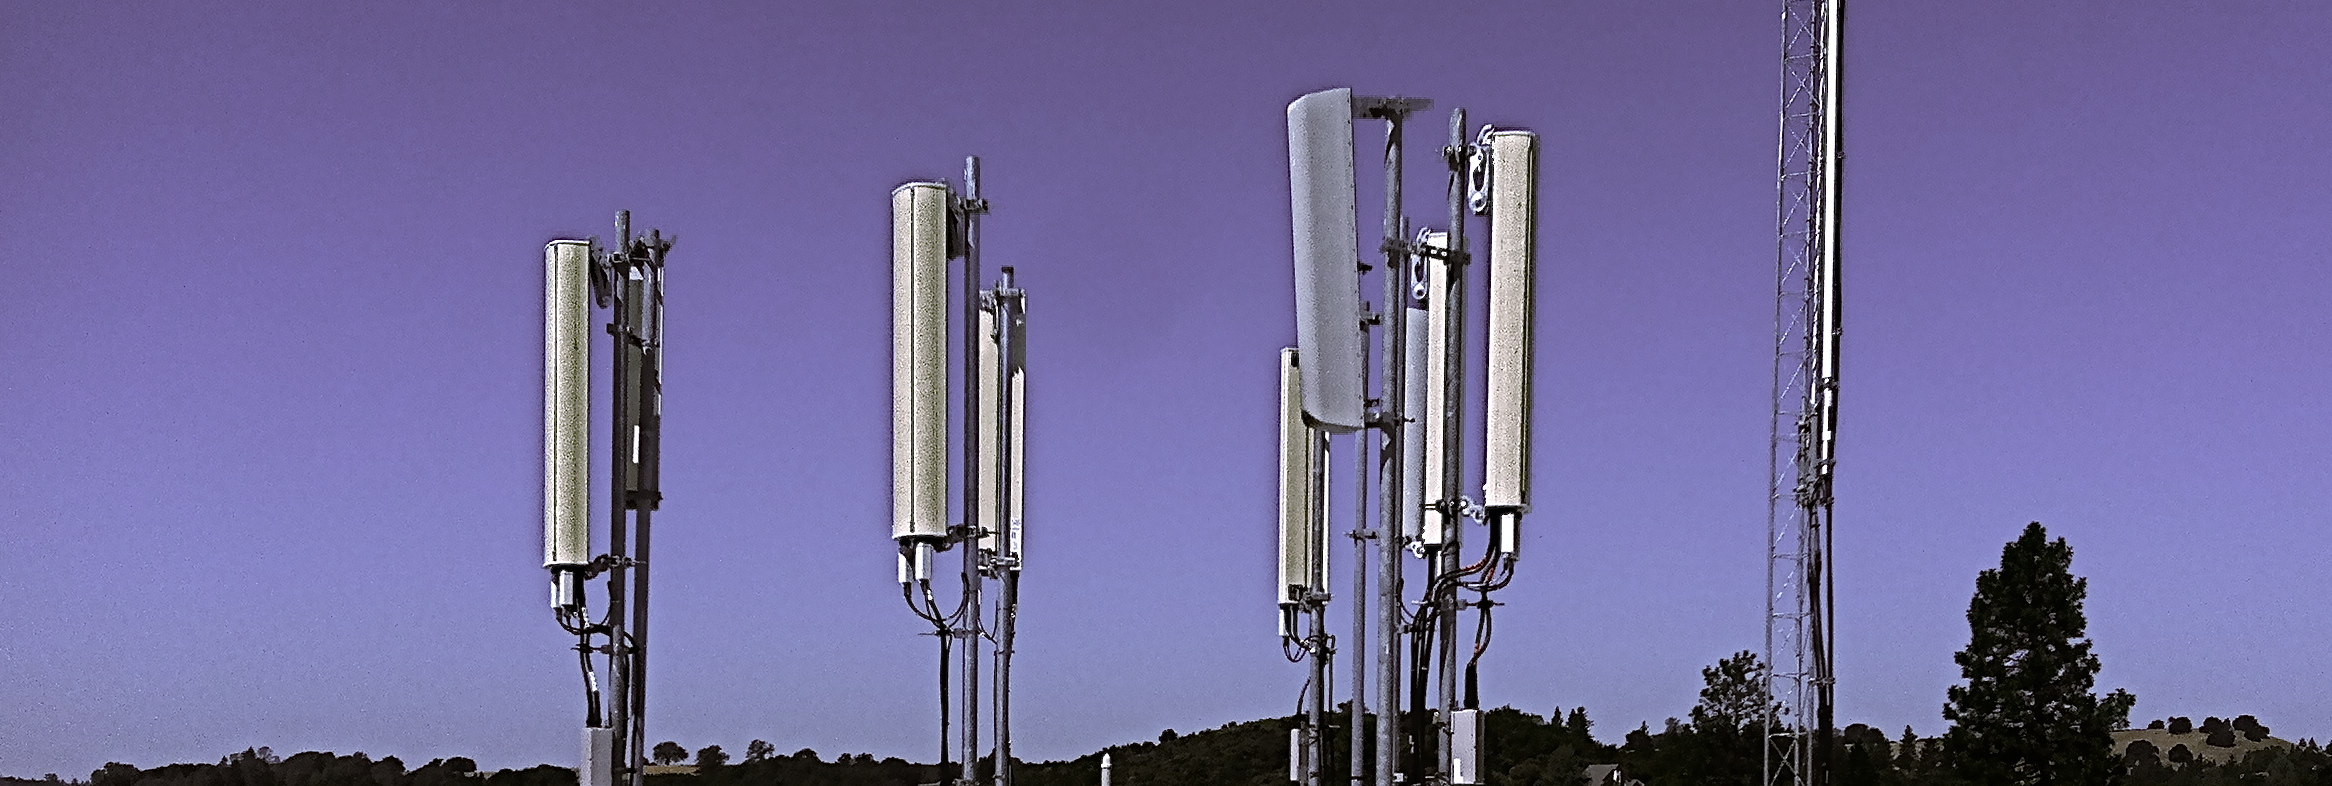 Mobile Tower Lease Agreement Cell Tower Lease Default Warning And Alert For Wireless Landlords